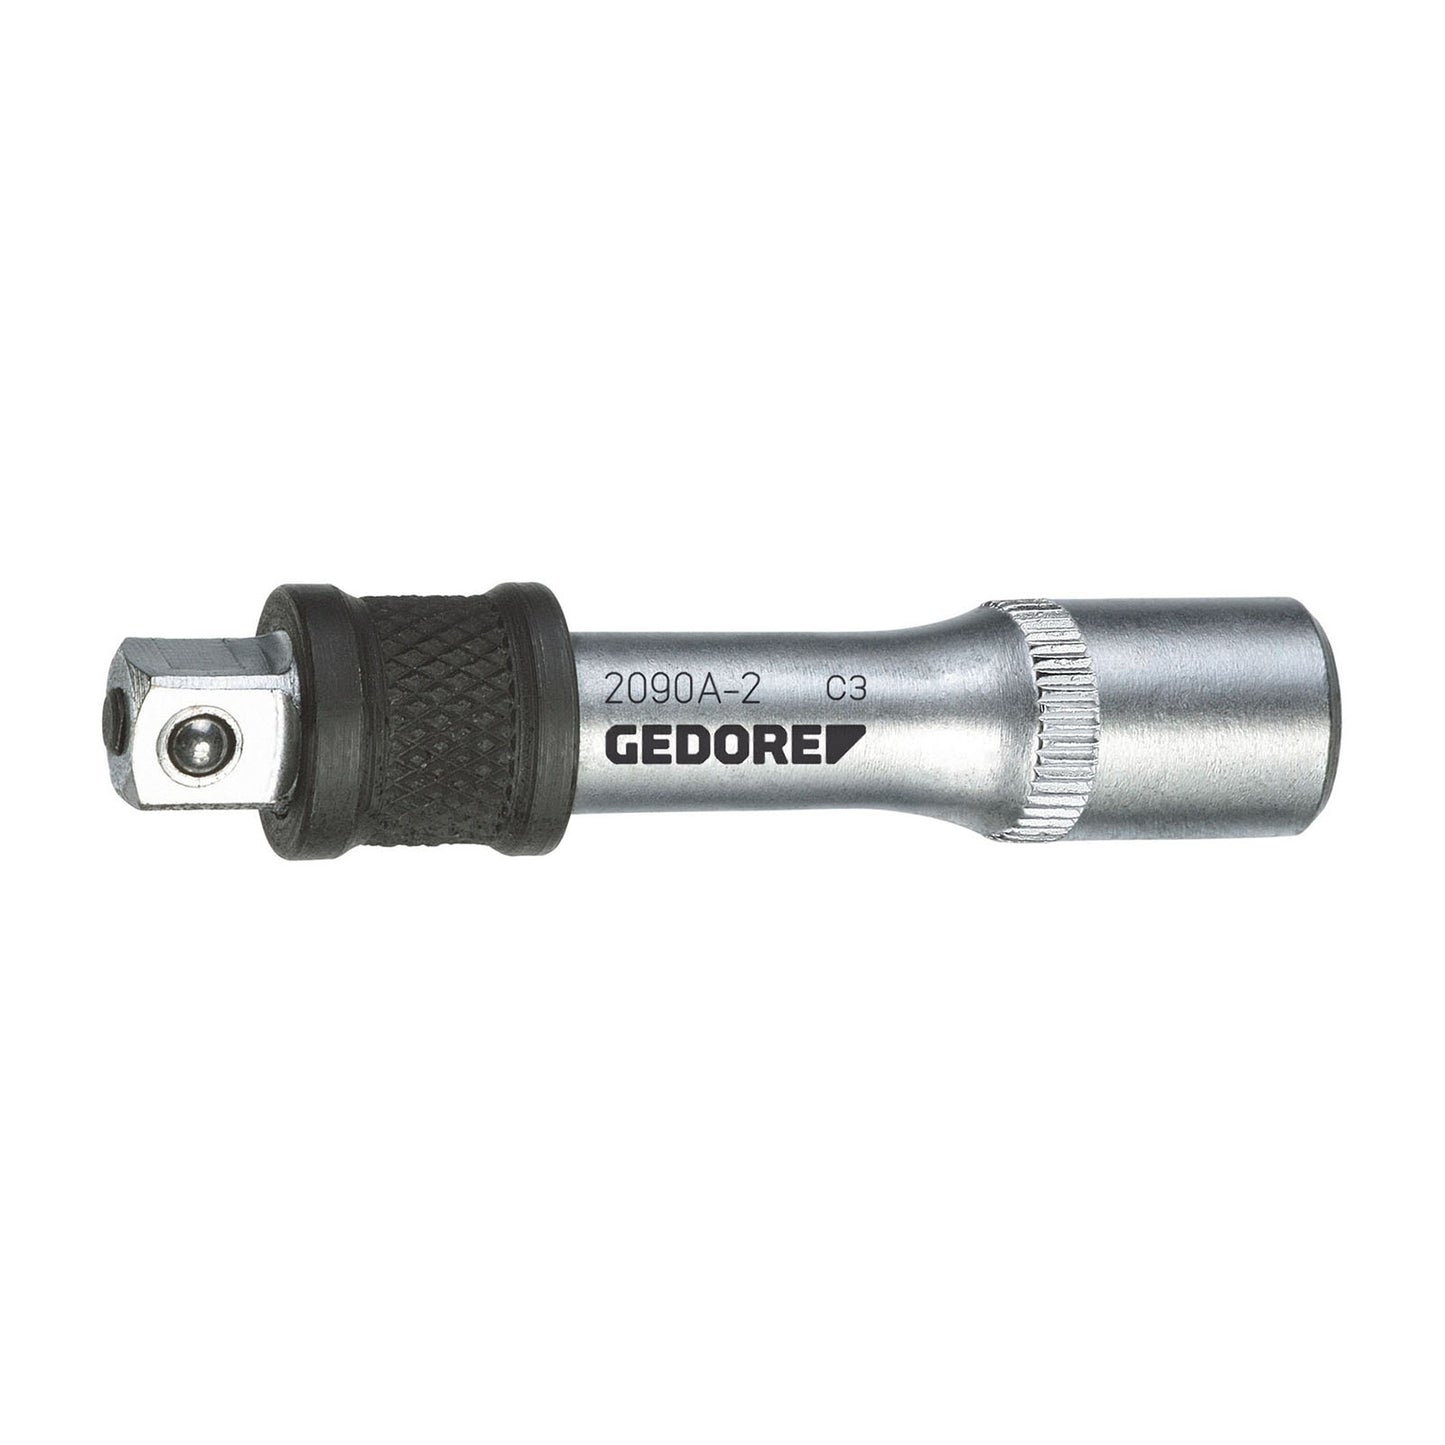 GEDORE 2090 A-2 - 1/4" extension, 50 mm (1932284)